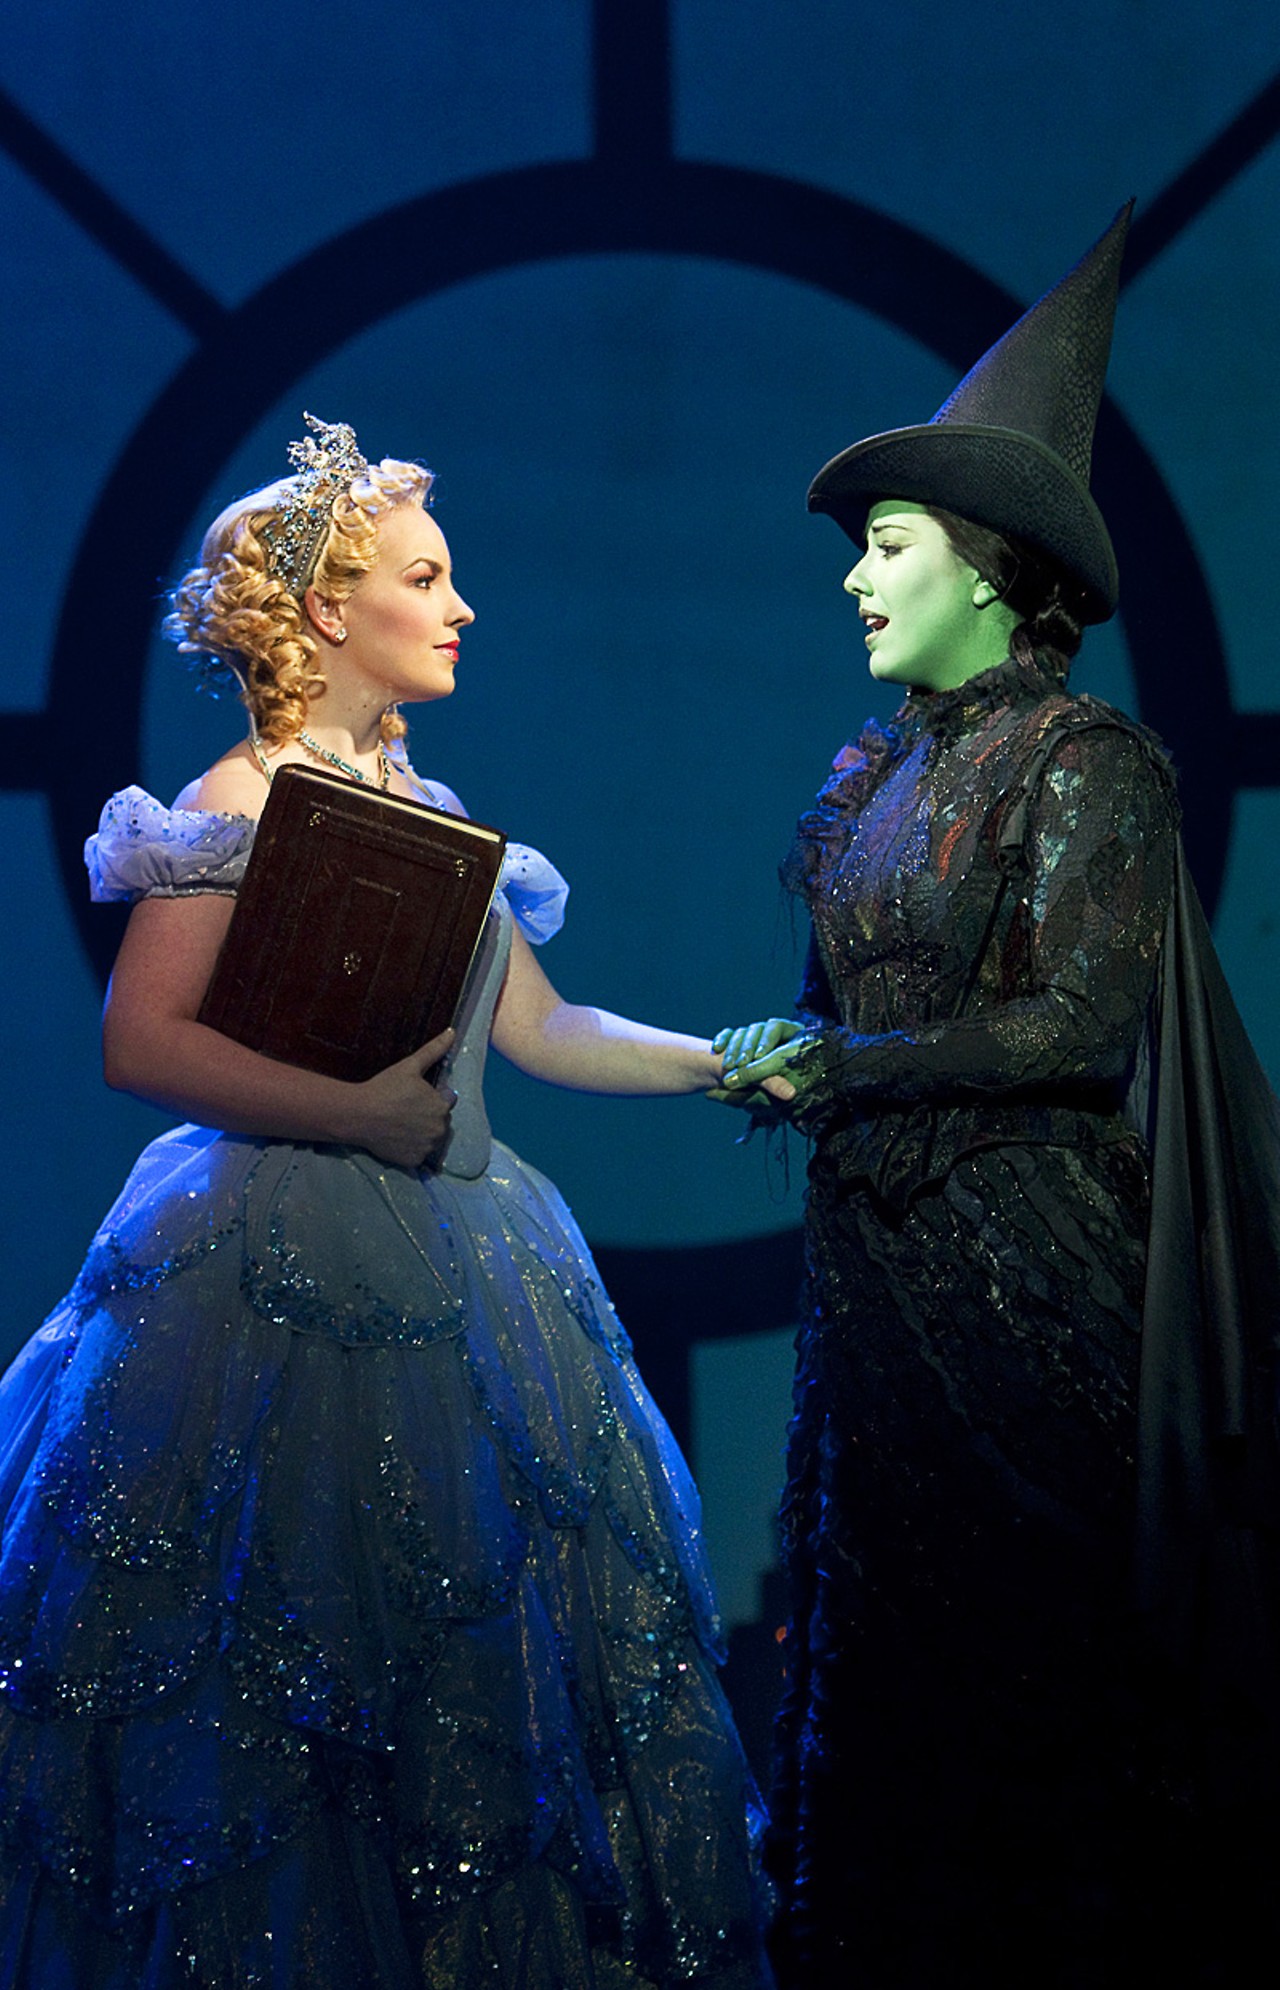 Nothing can derail Wicked at the Fab Fox | Theater | St. Louis | St. Louis News and Events ...